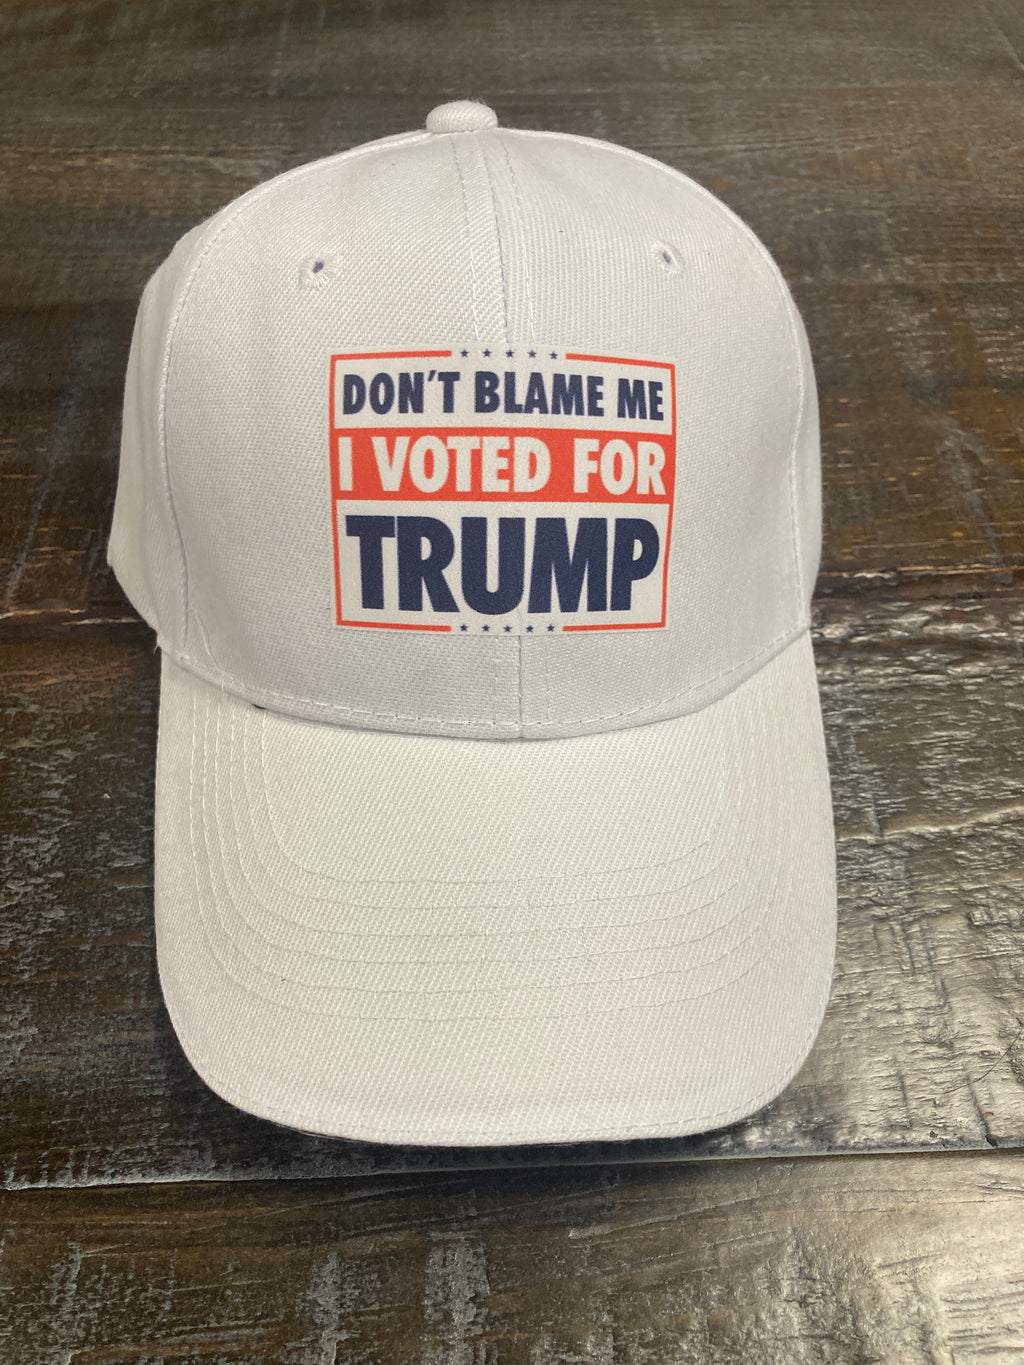 "Don't Blame me I Voted for Trump" White Hat